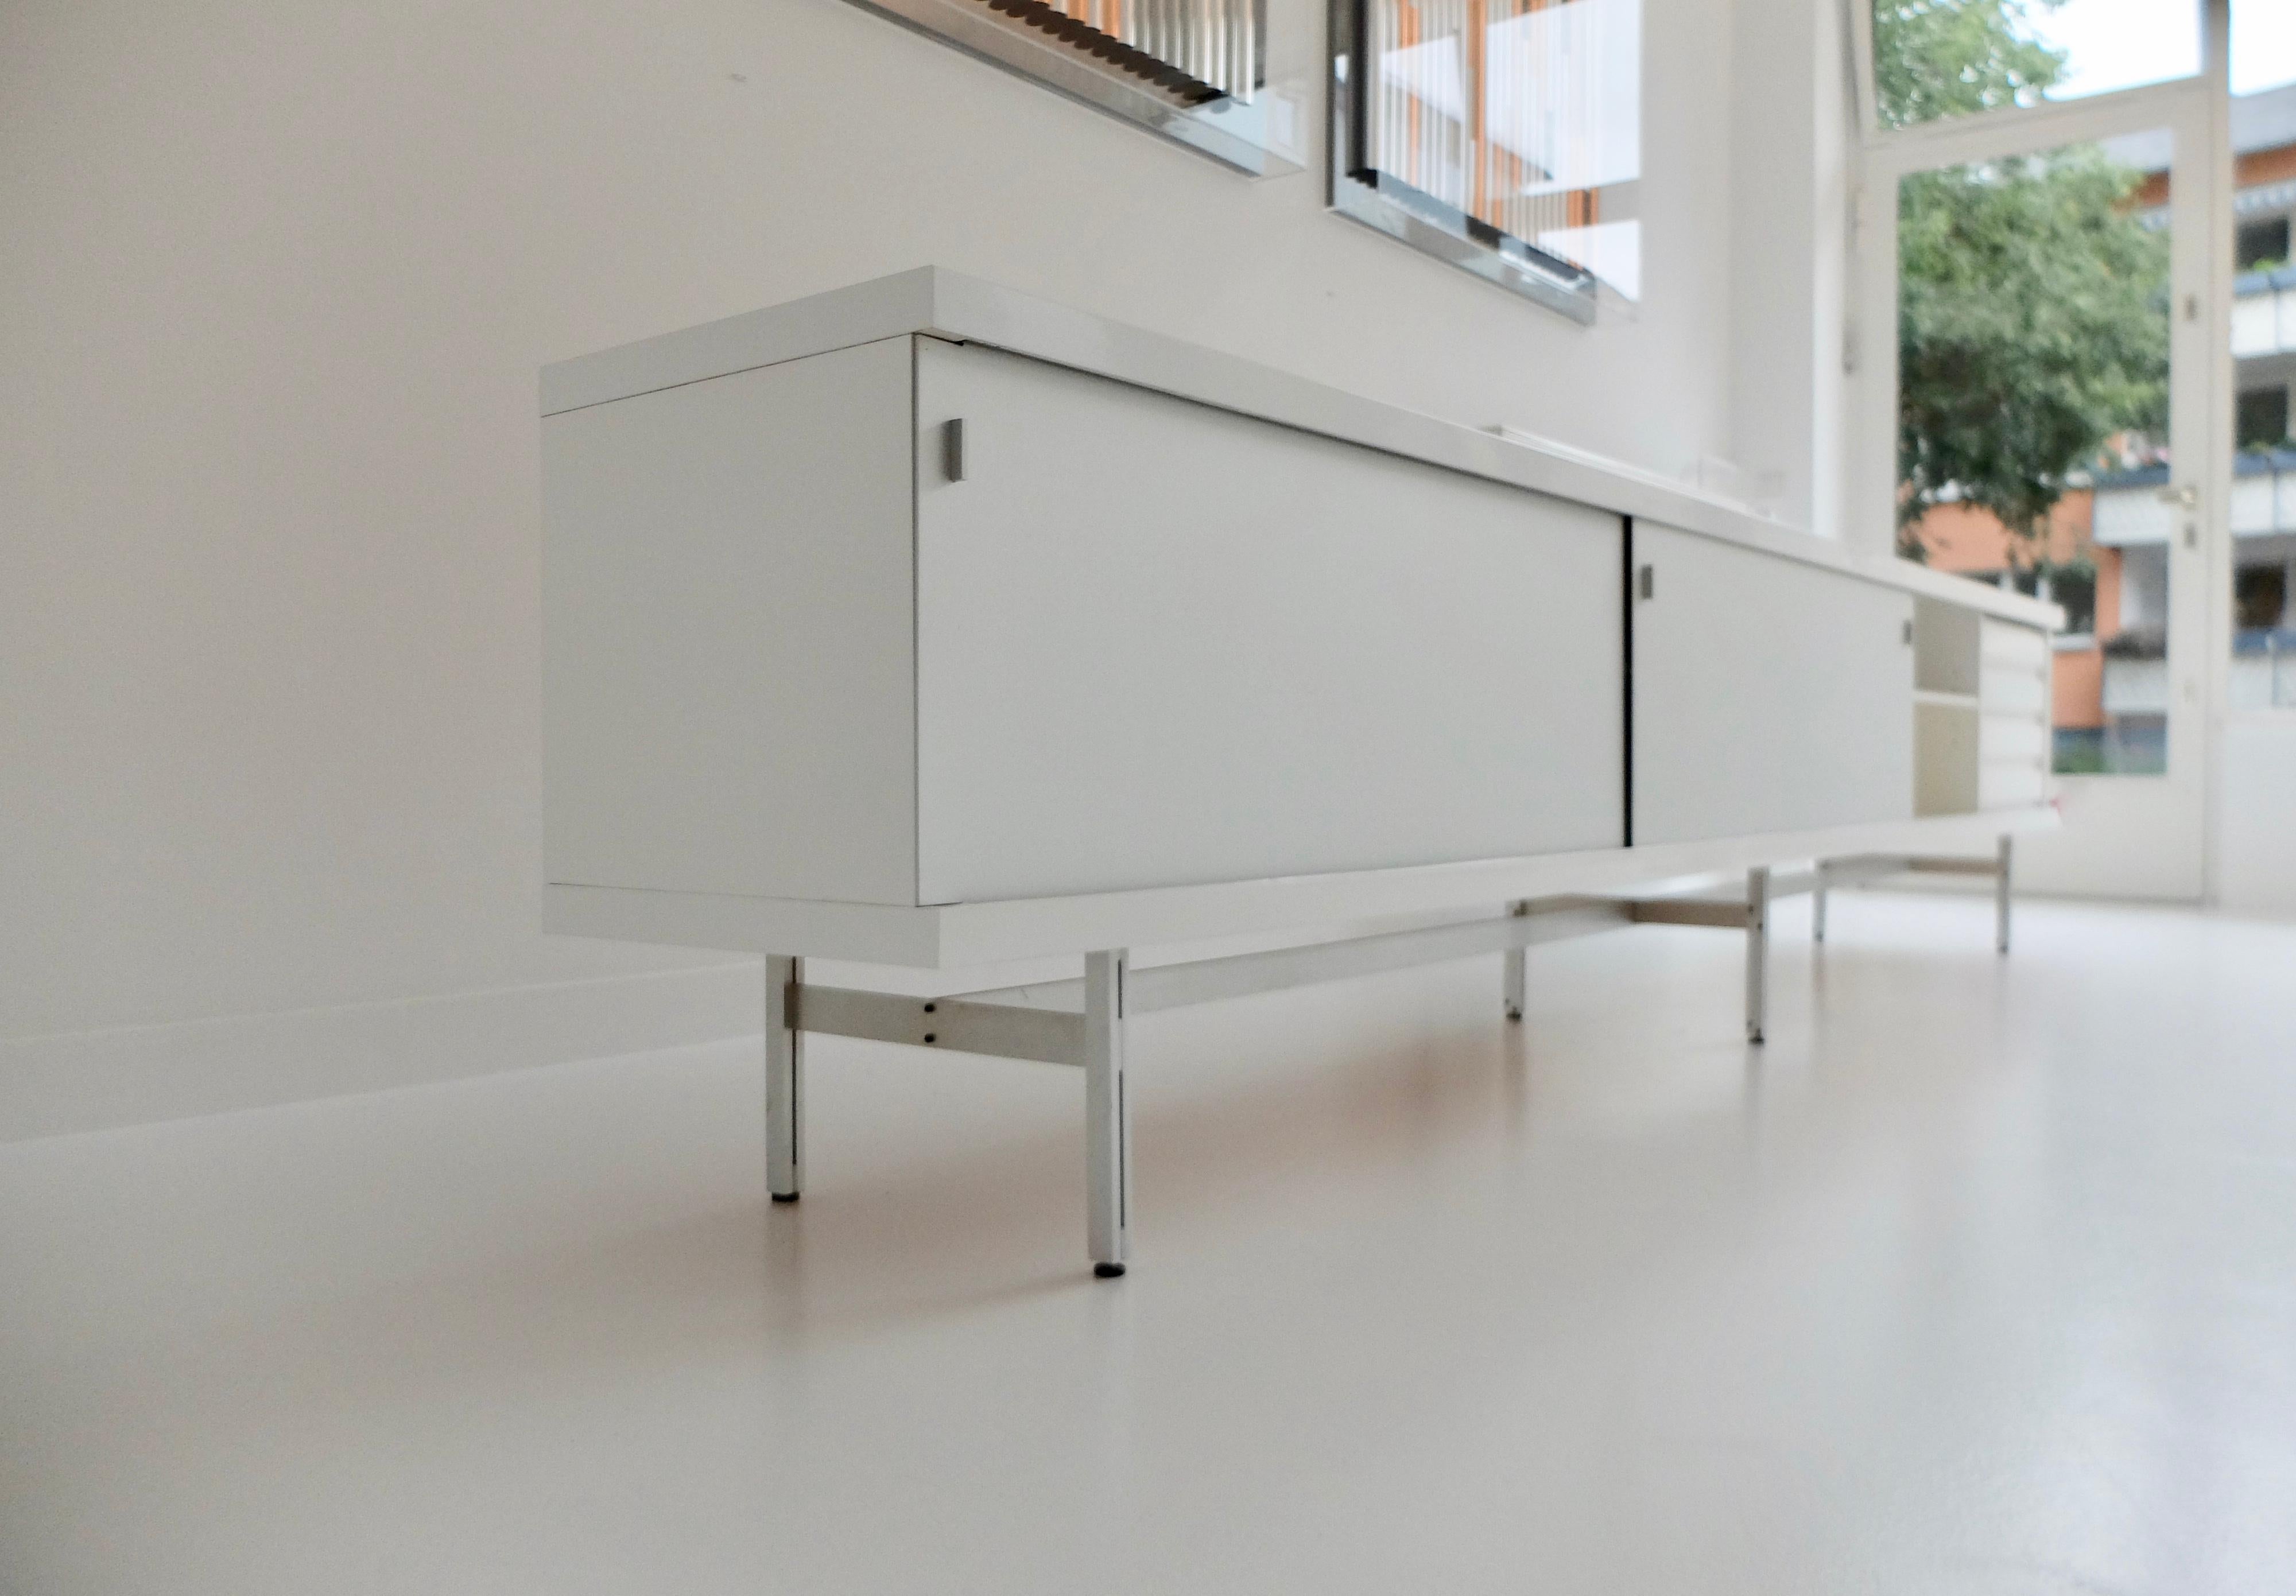 Mid-20th Century Ultralong sideboard model 1730 by Horst Brüning for Behr Production KG, 1967